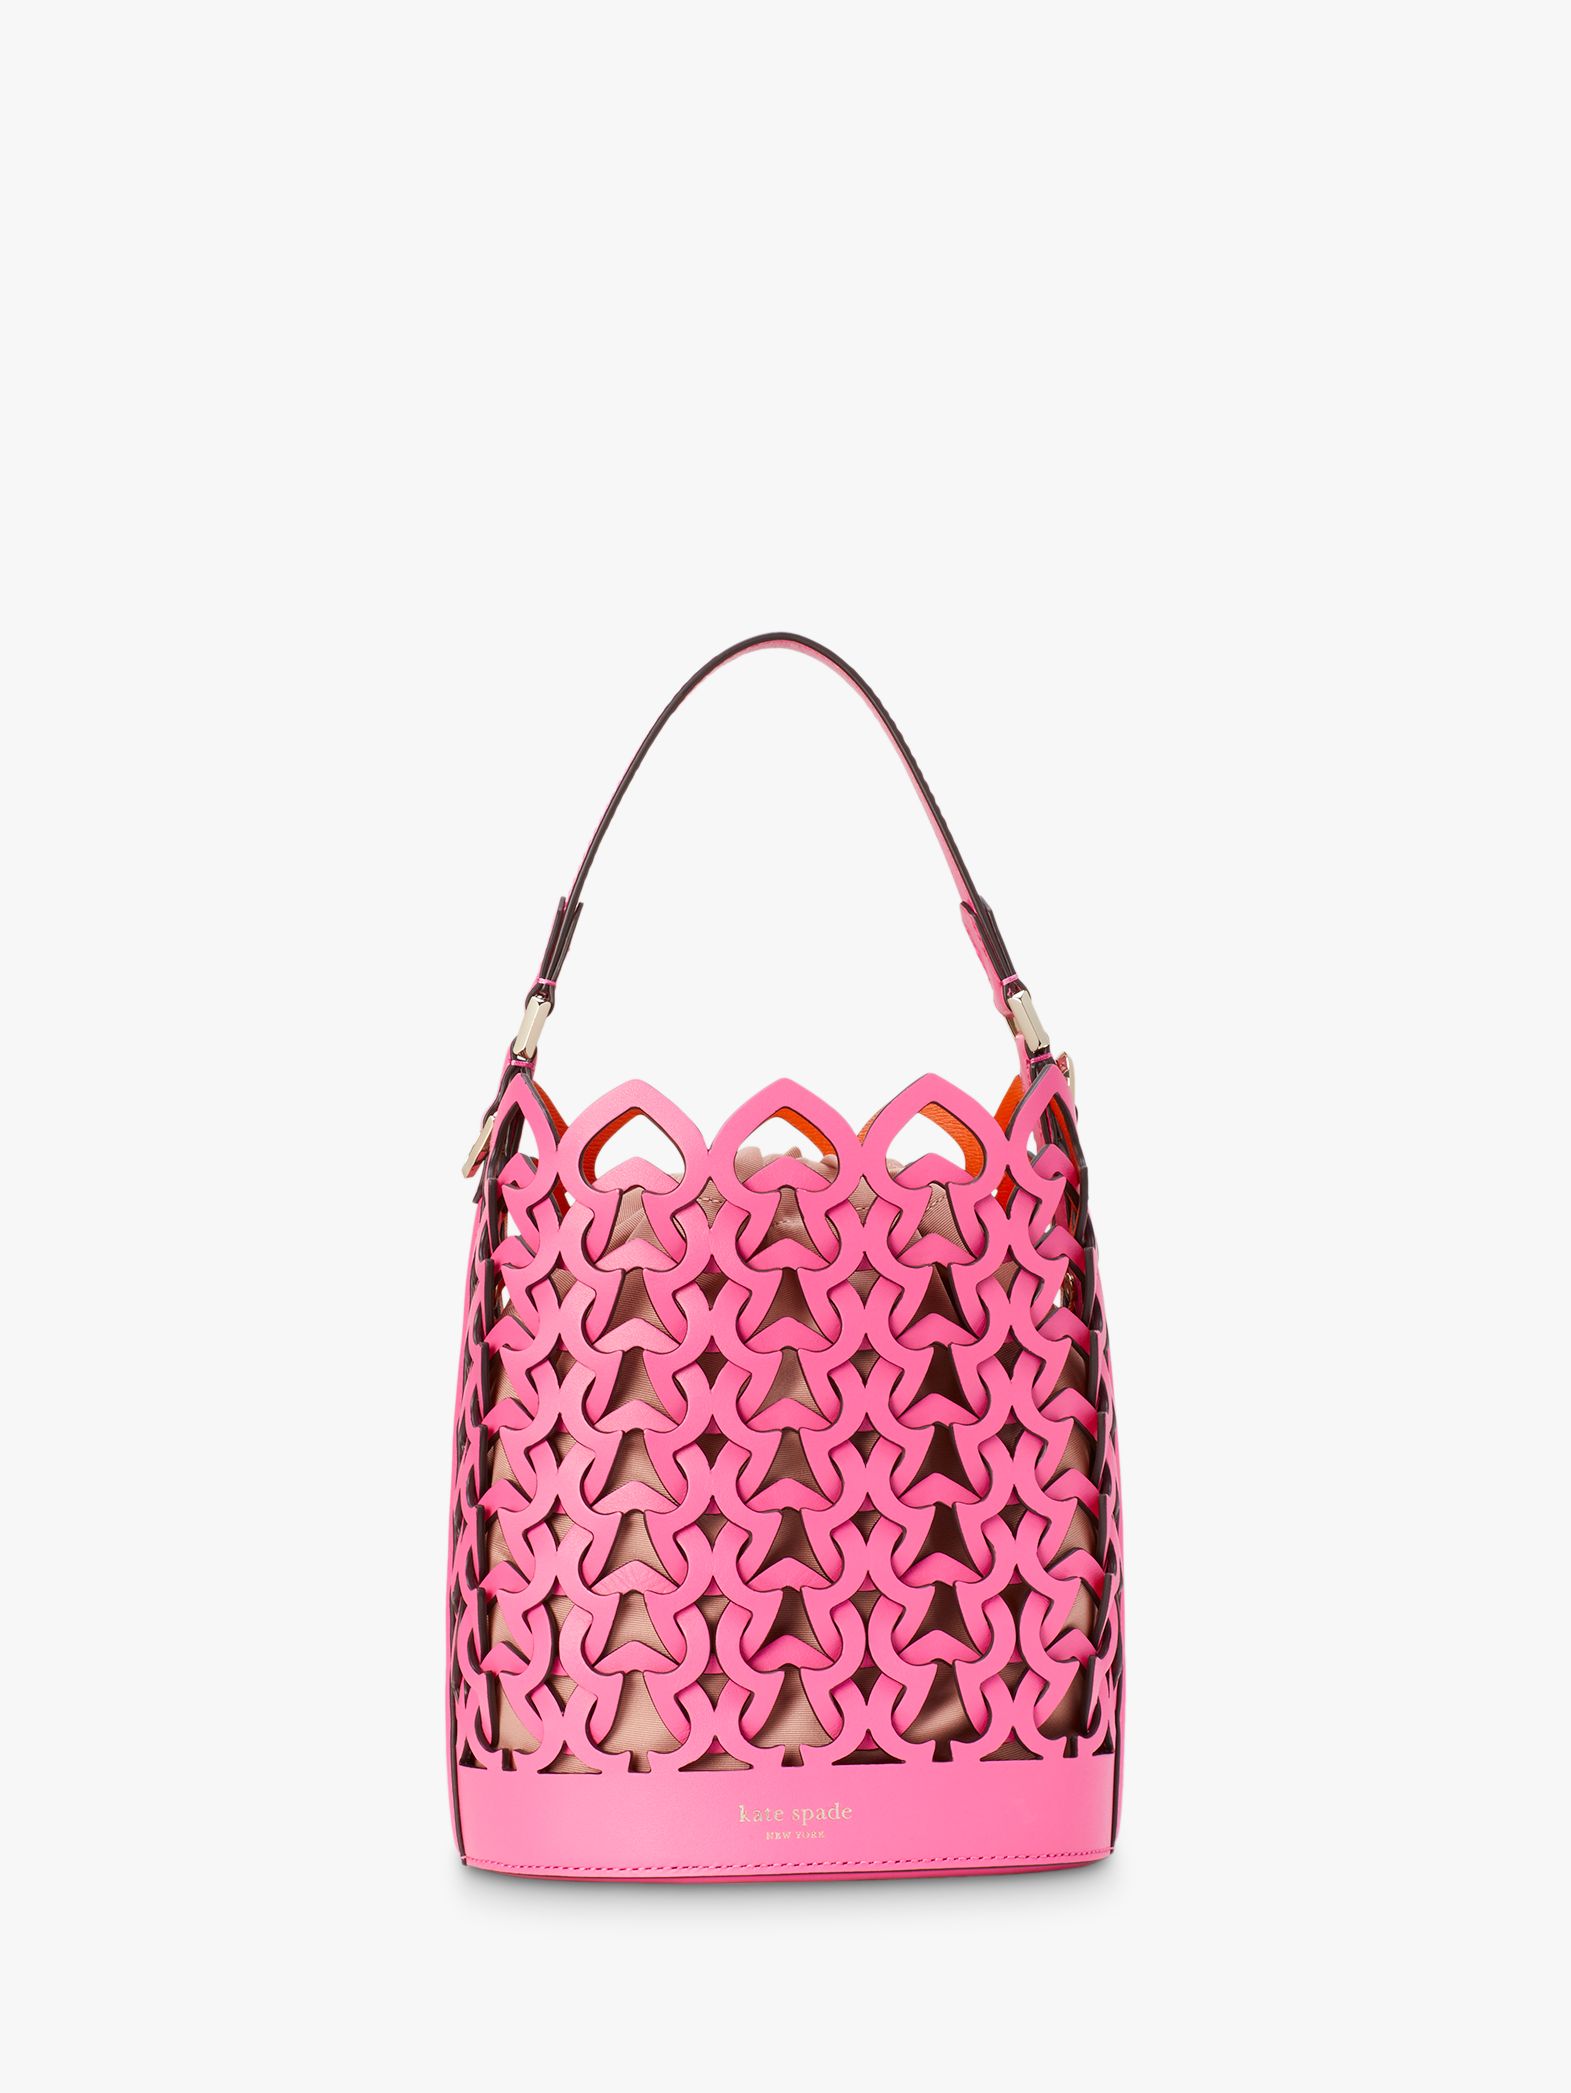 kate spade new york Dorie Leather Small Bucket Bag at John Lewis & Partners